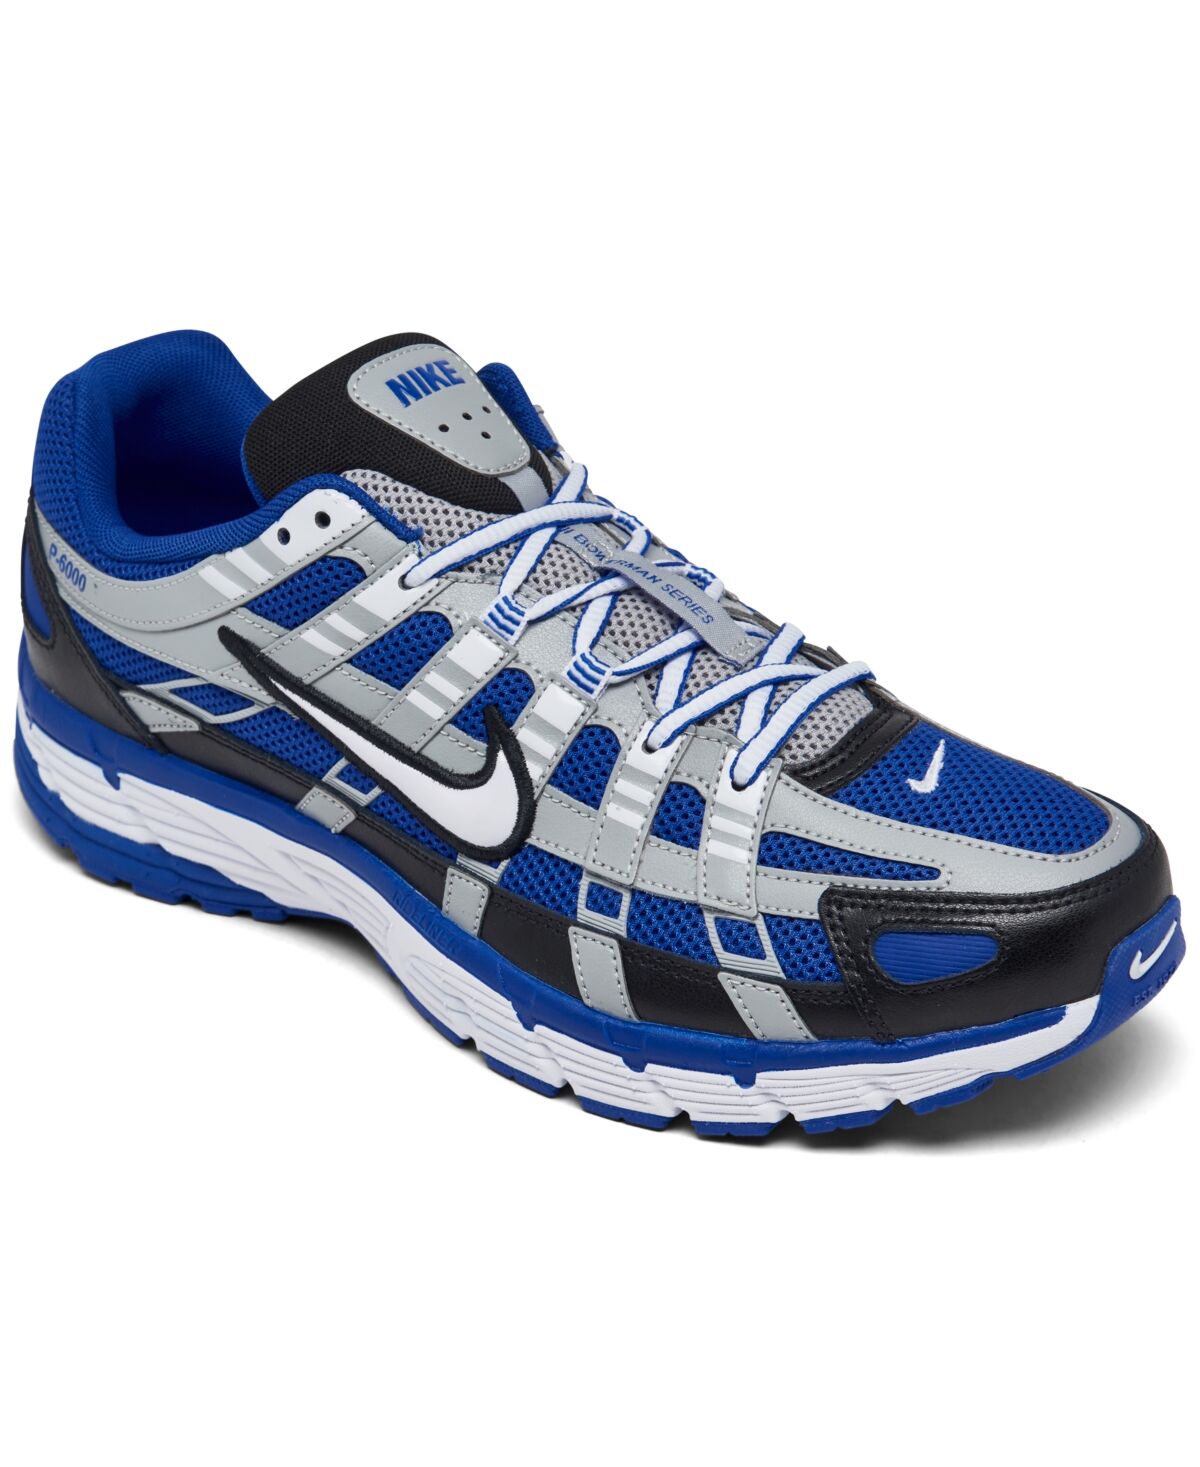 Nike Men's P-6000 Casual Sneakers from Finish Line - Racer Blue, Silver, White